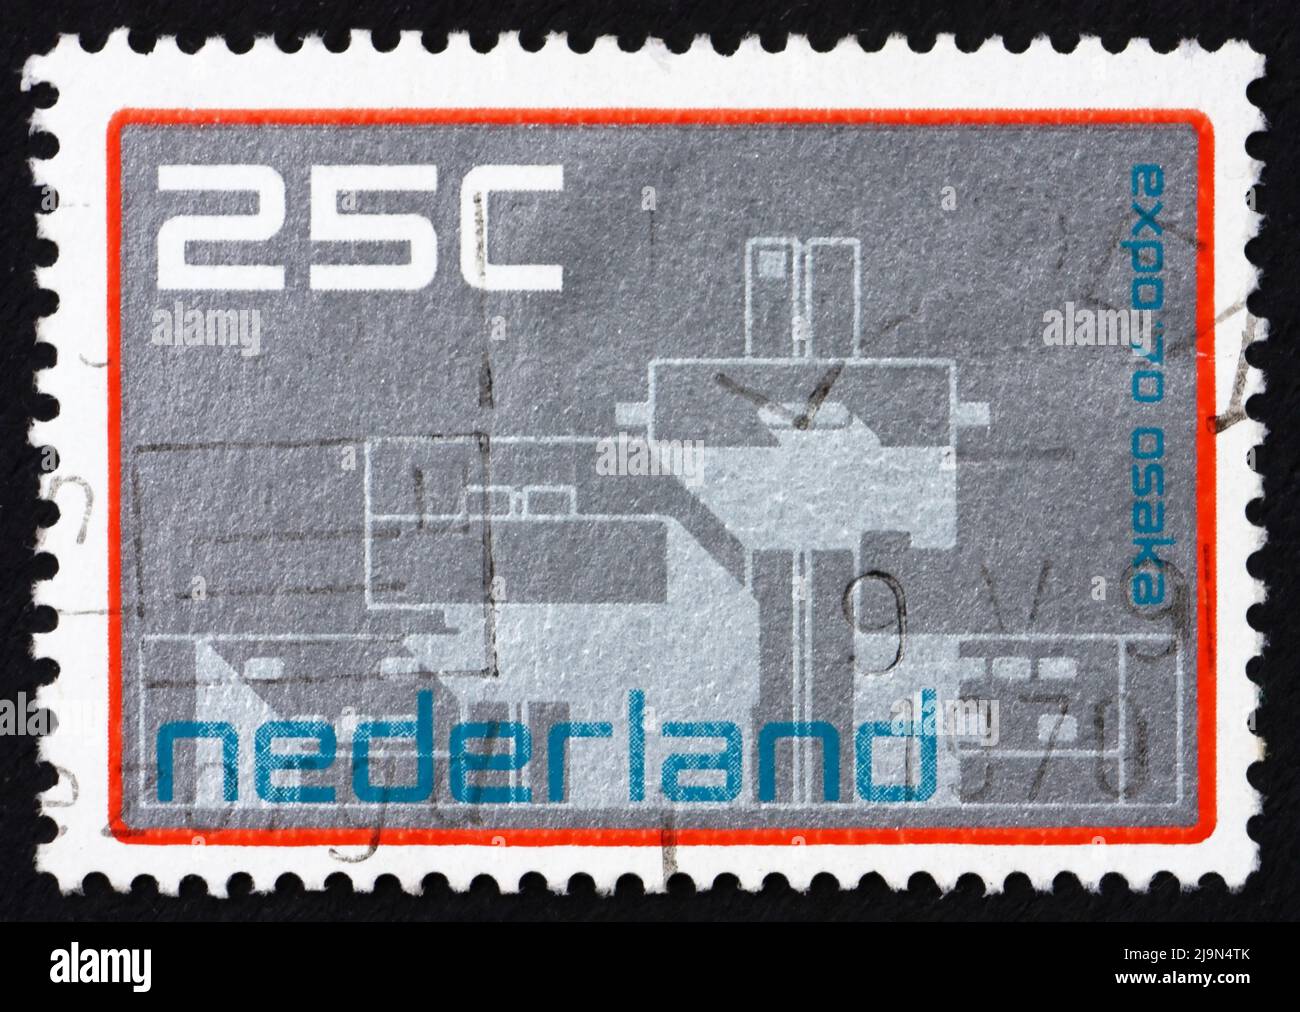 NETHERLANDS - CIRCA 1970: a stamp printed in the Netherlands shows Dutch Pavilion, EXPO 70, Osaka, Japan, circa 1970 Stock Photo